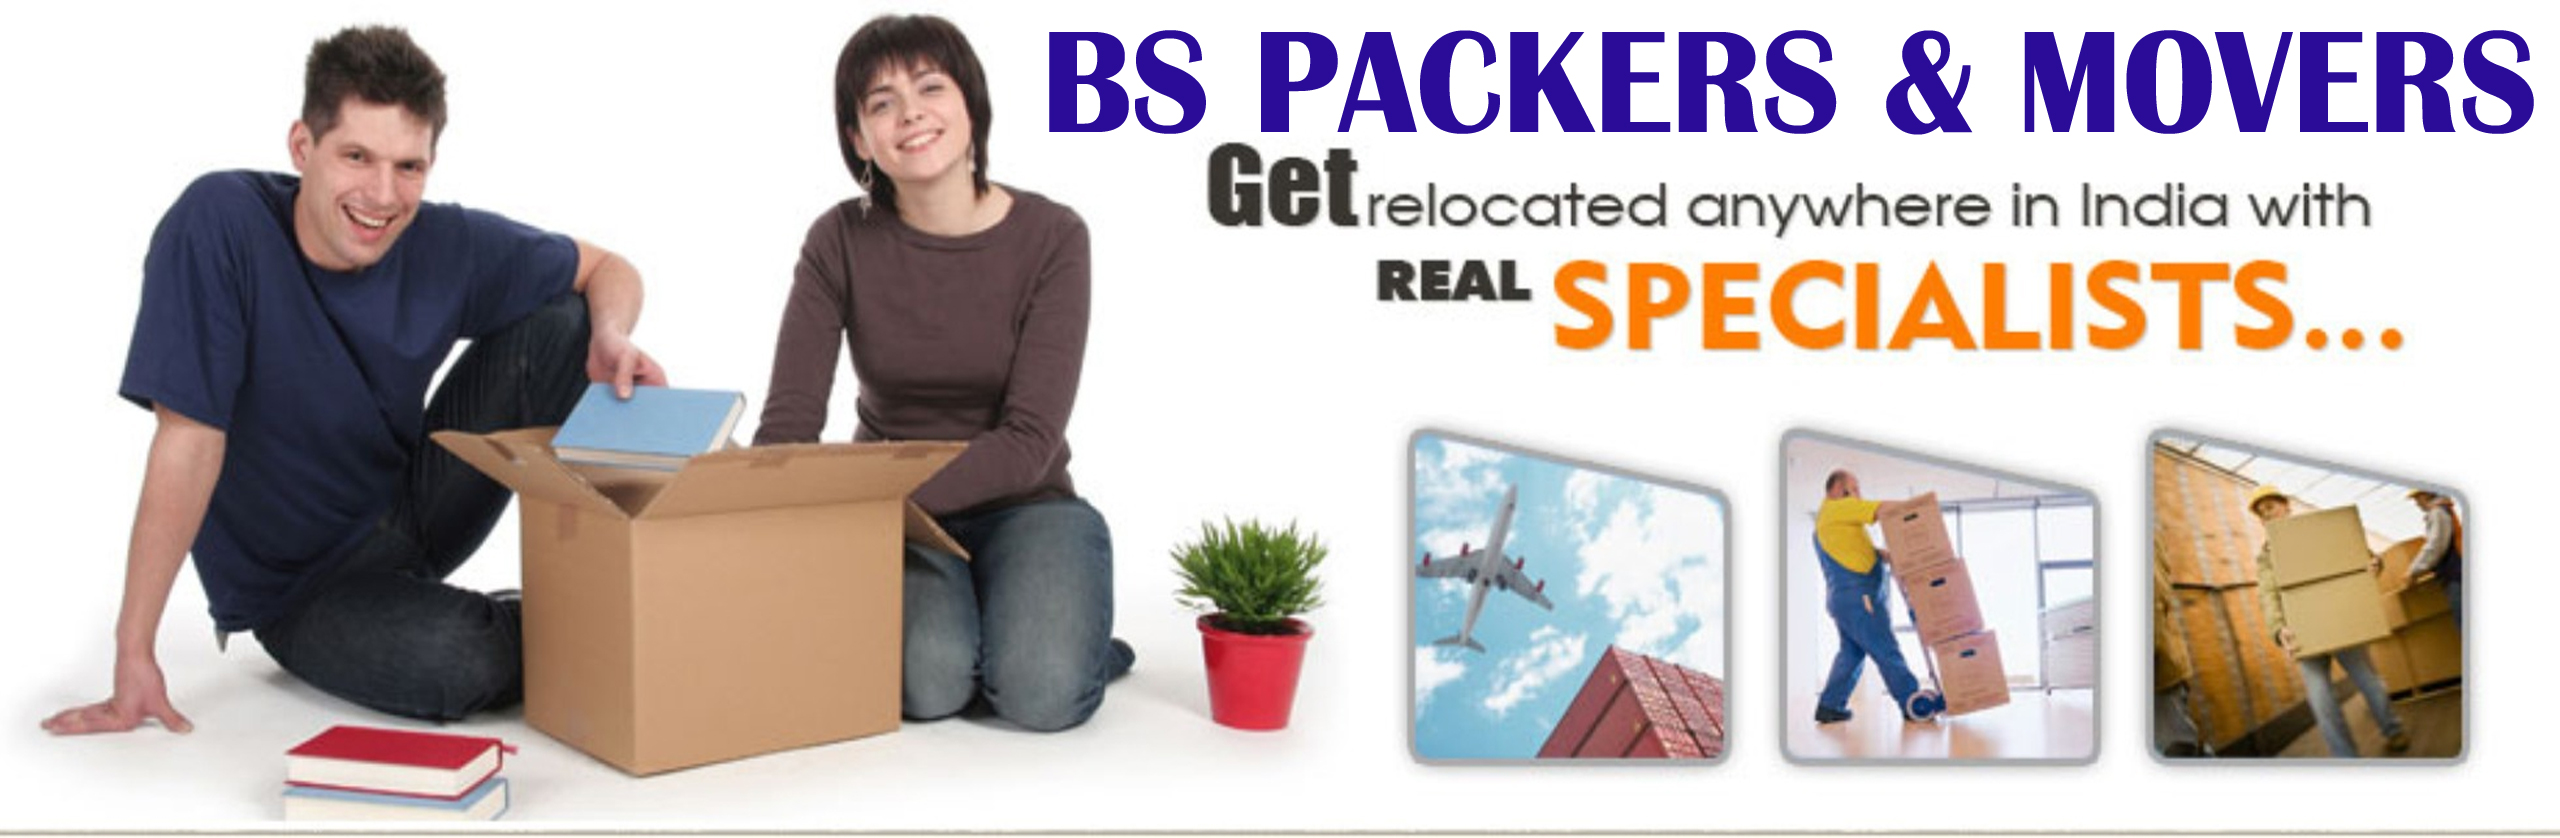 BS Packers and movers Noida Banner